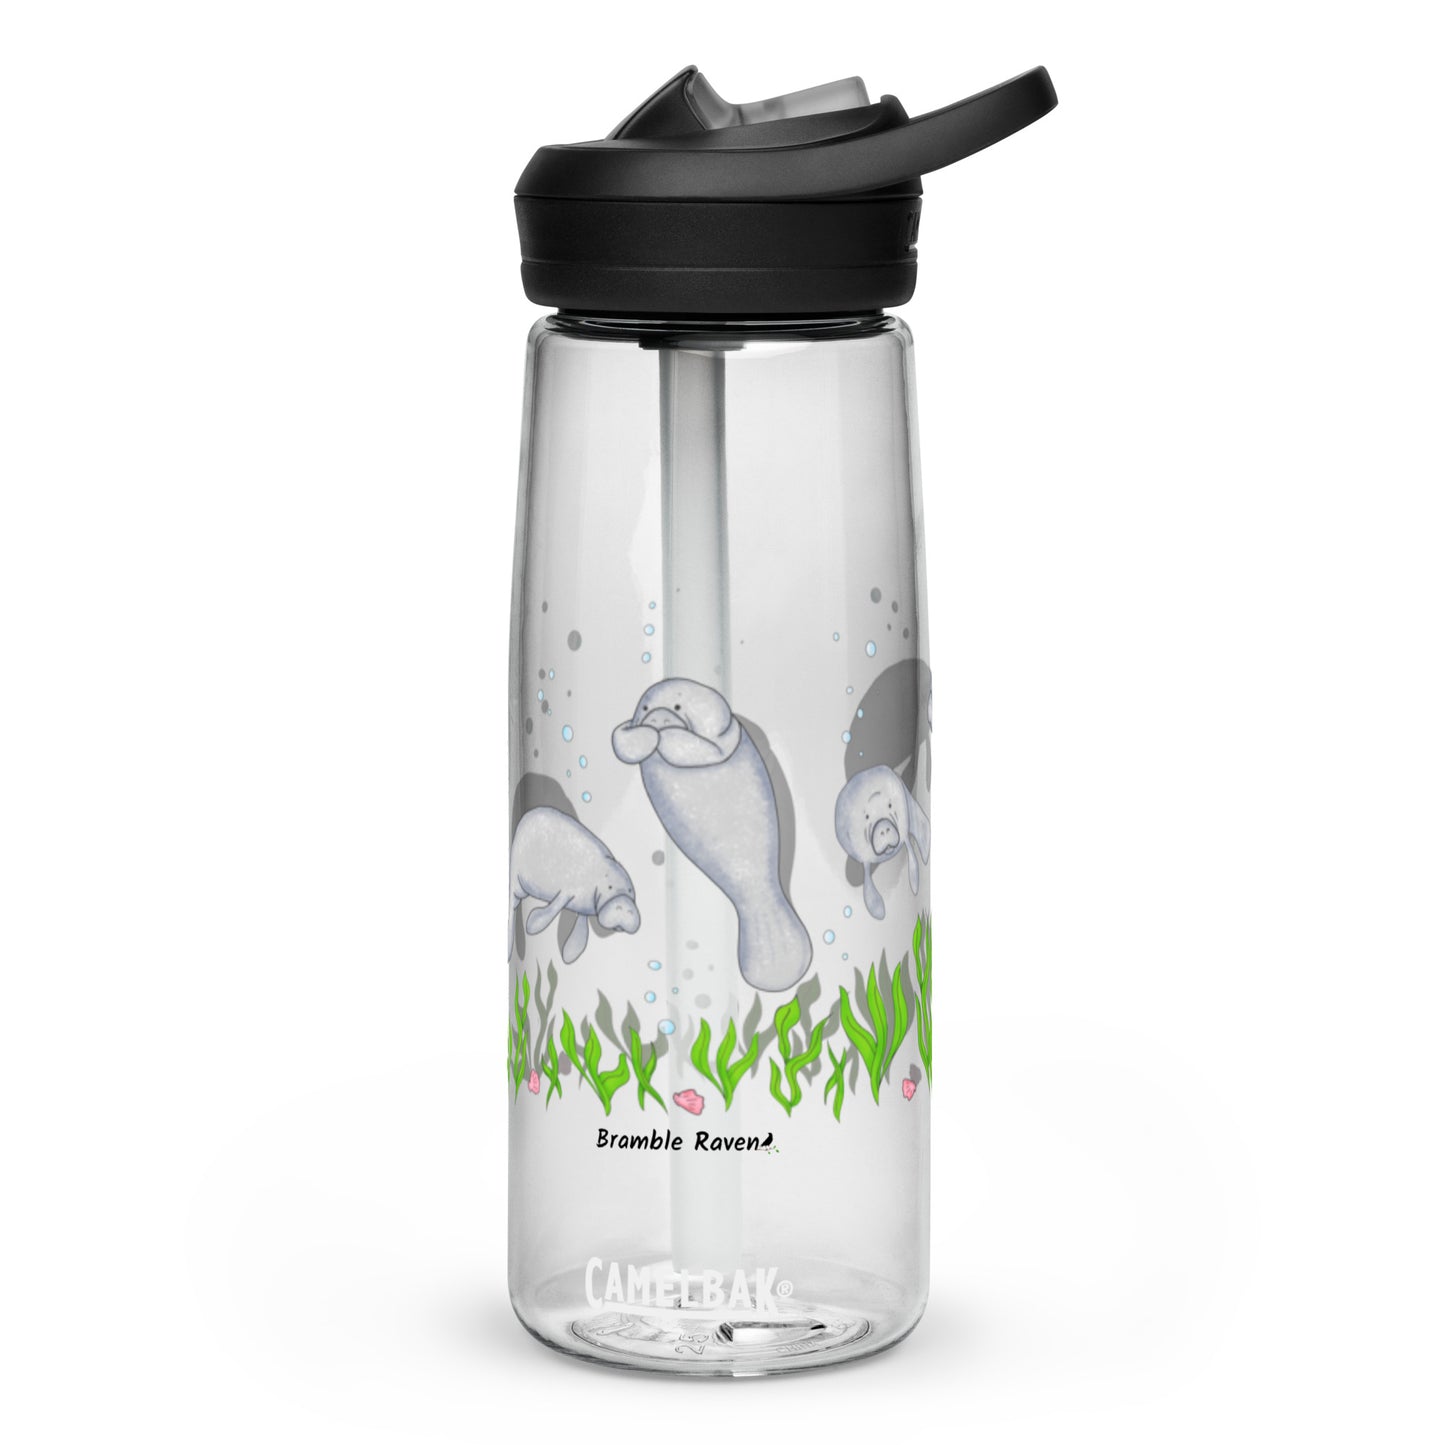 25 ounce sports water bottle with spill proof lid and bite valve. Clear stain and odor-resistant BPA-free plastic with manatee designs around the bottle, swimming above the seaweed and shells.